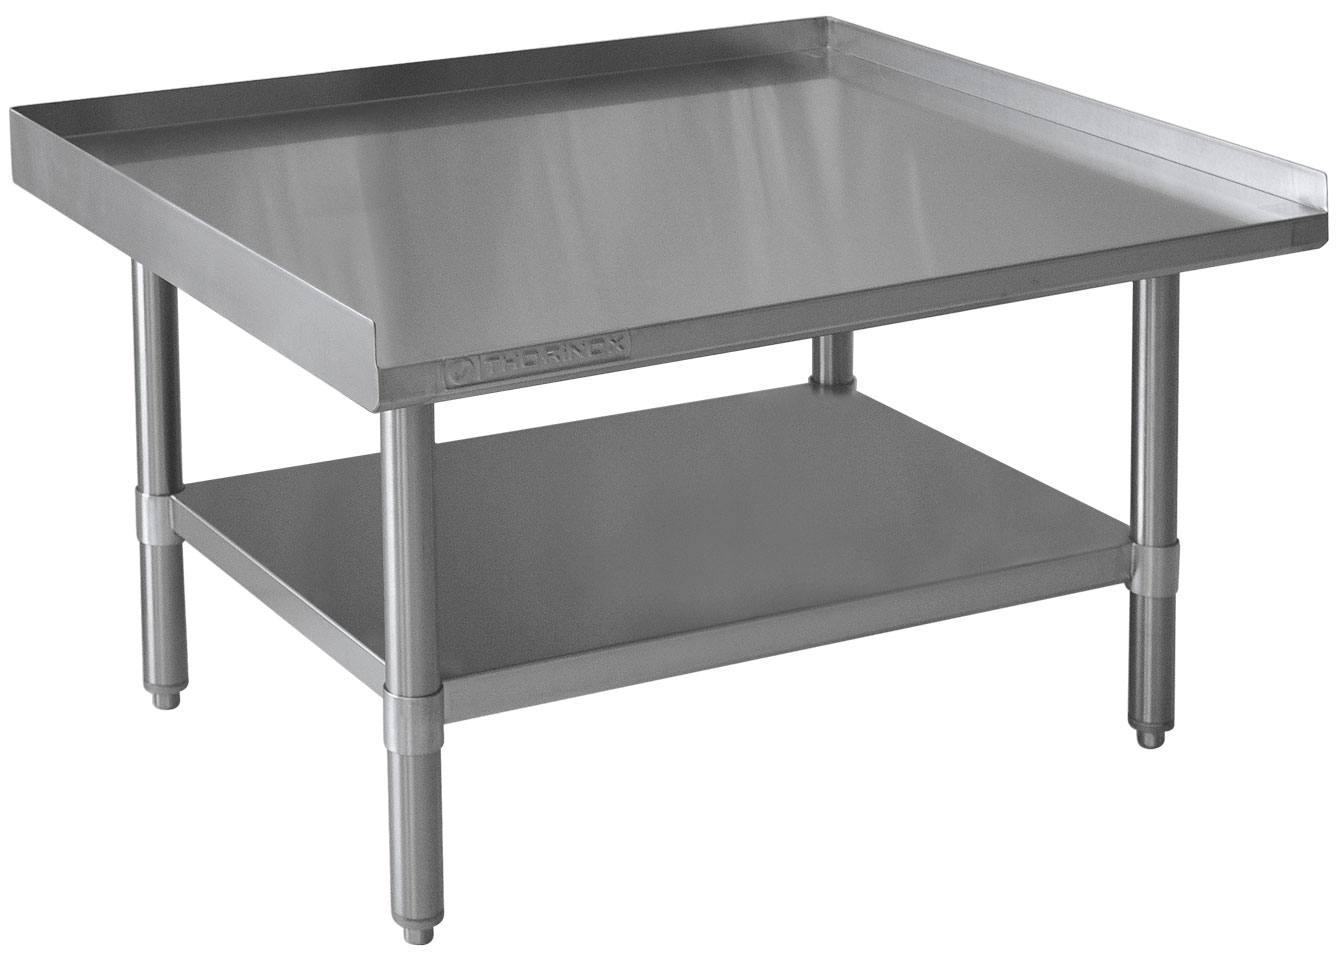 Thorinox DSTAND-3048-SS 30x48 Stainless Table - Stainless Steel Undershelf